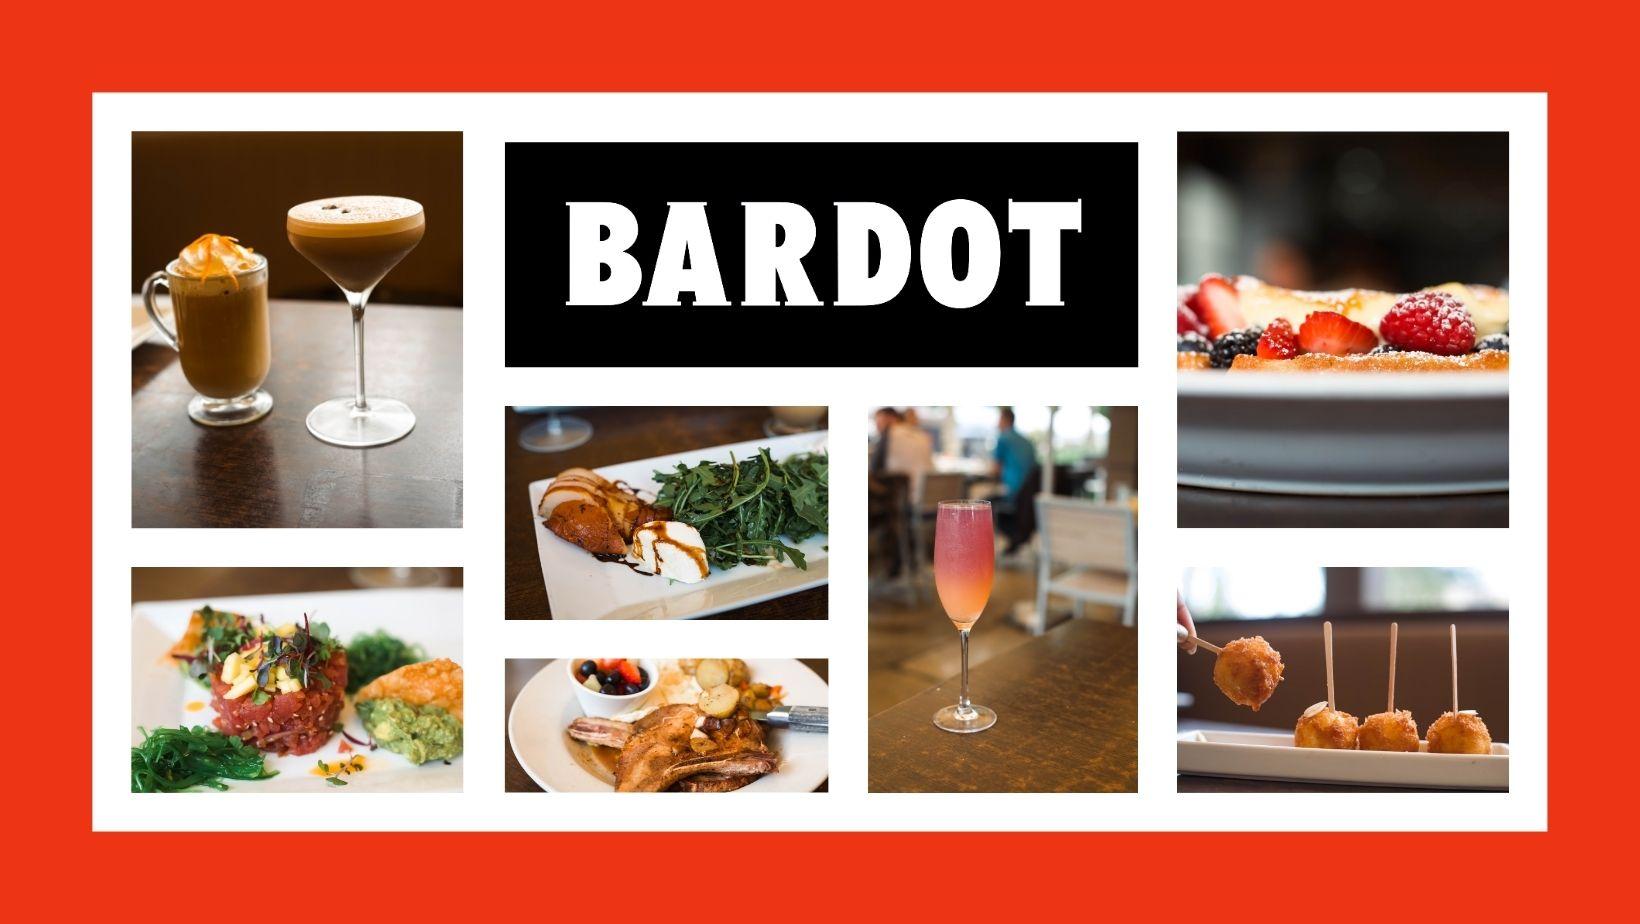 Collage of menu items from Bardot restaurant, including brunch items.
